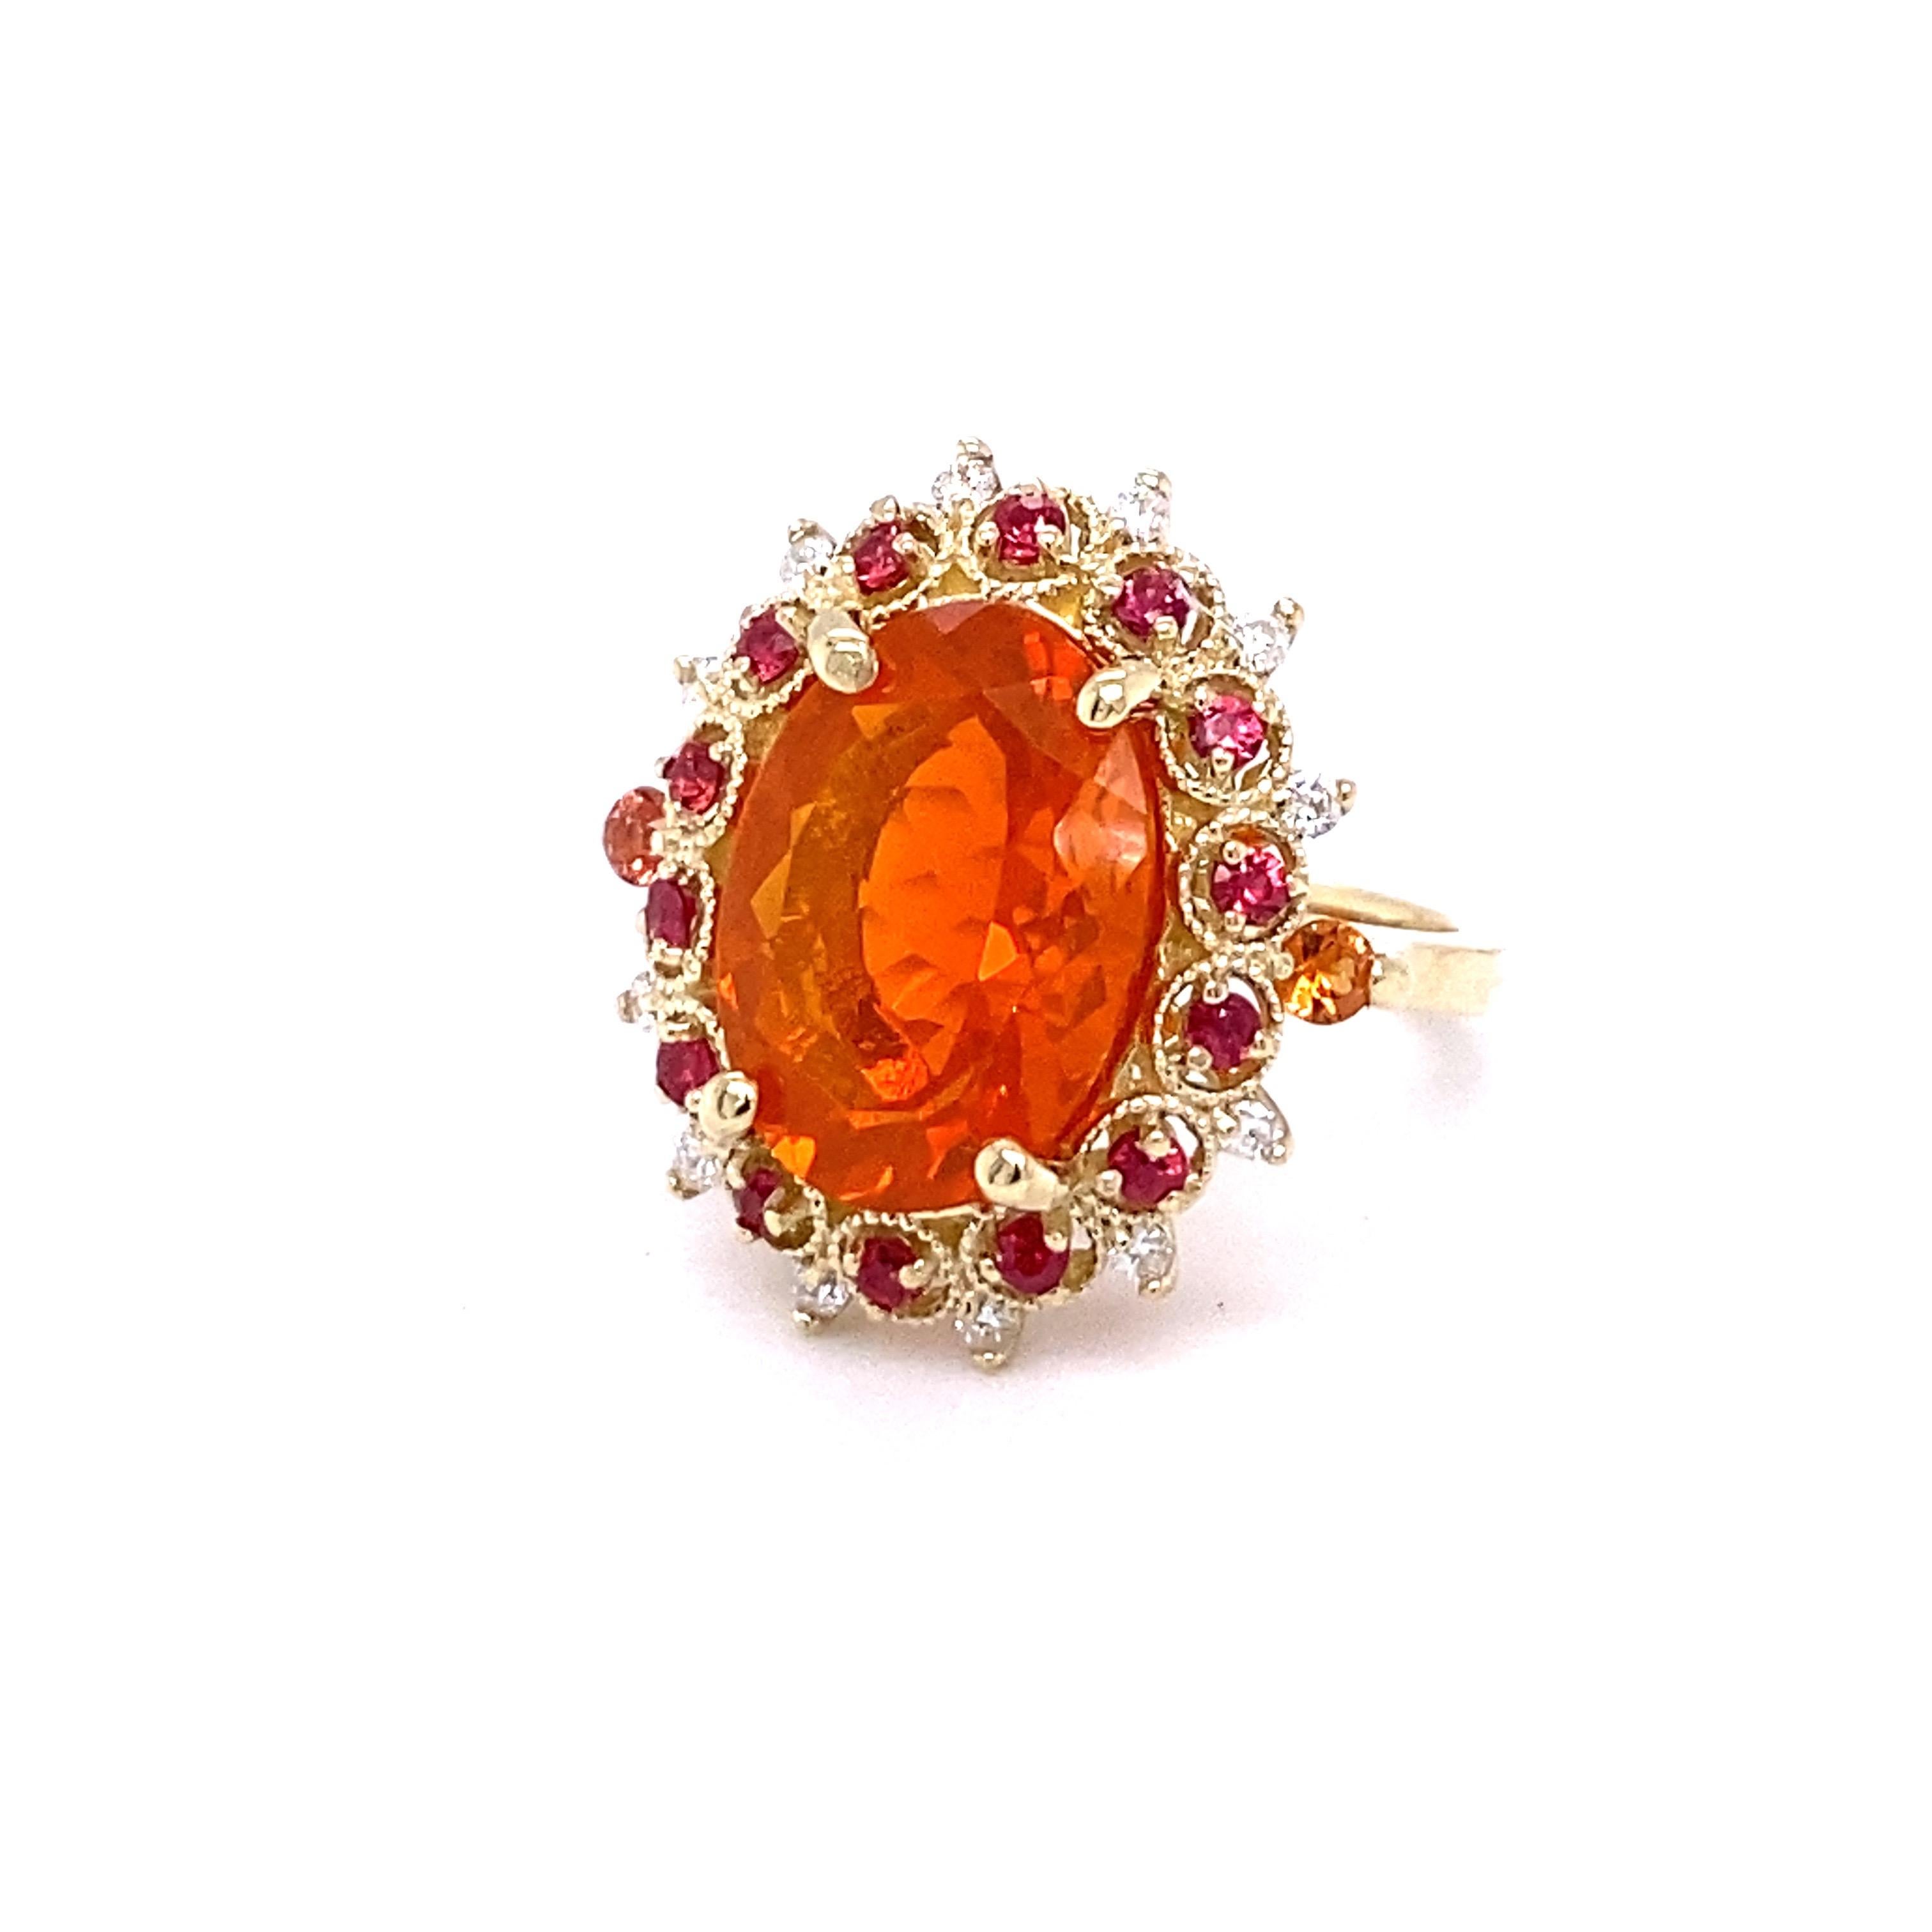 Beautiful and uniue Fire Opal and Diamond ring with a touch of Sapphires!!

Item specs:

Fire Opal/4.94cts
12 Round Cut Diamonds/0.20ct
14 Red Sapphires/0.49ct
2 Orange Sapphires/0.17ct
14KY Gold/approx. 6.3grams

Total Carat weight of the ring is